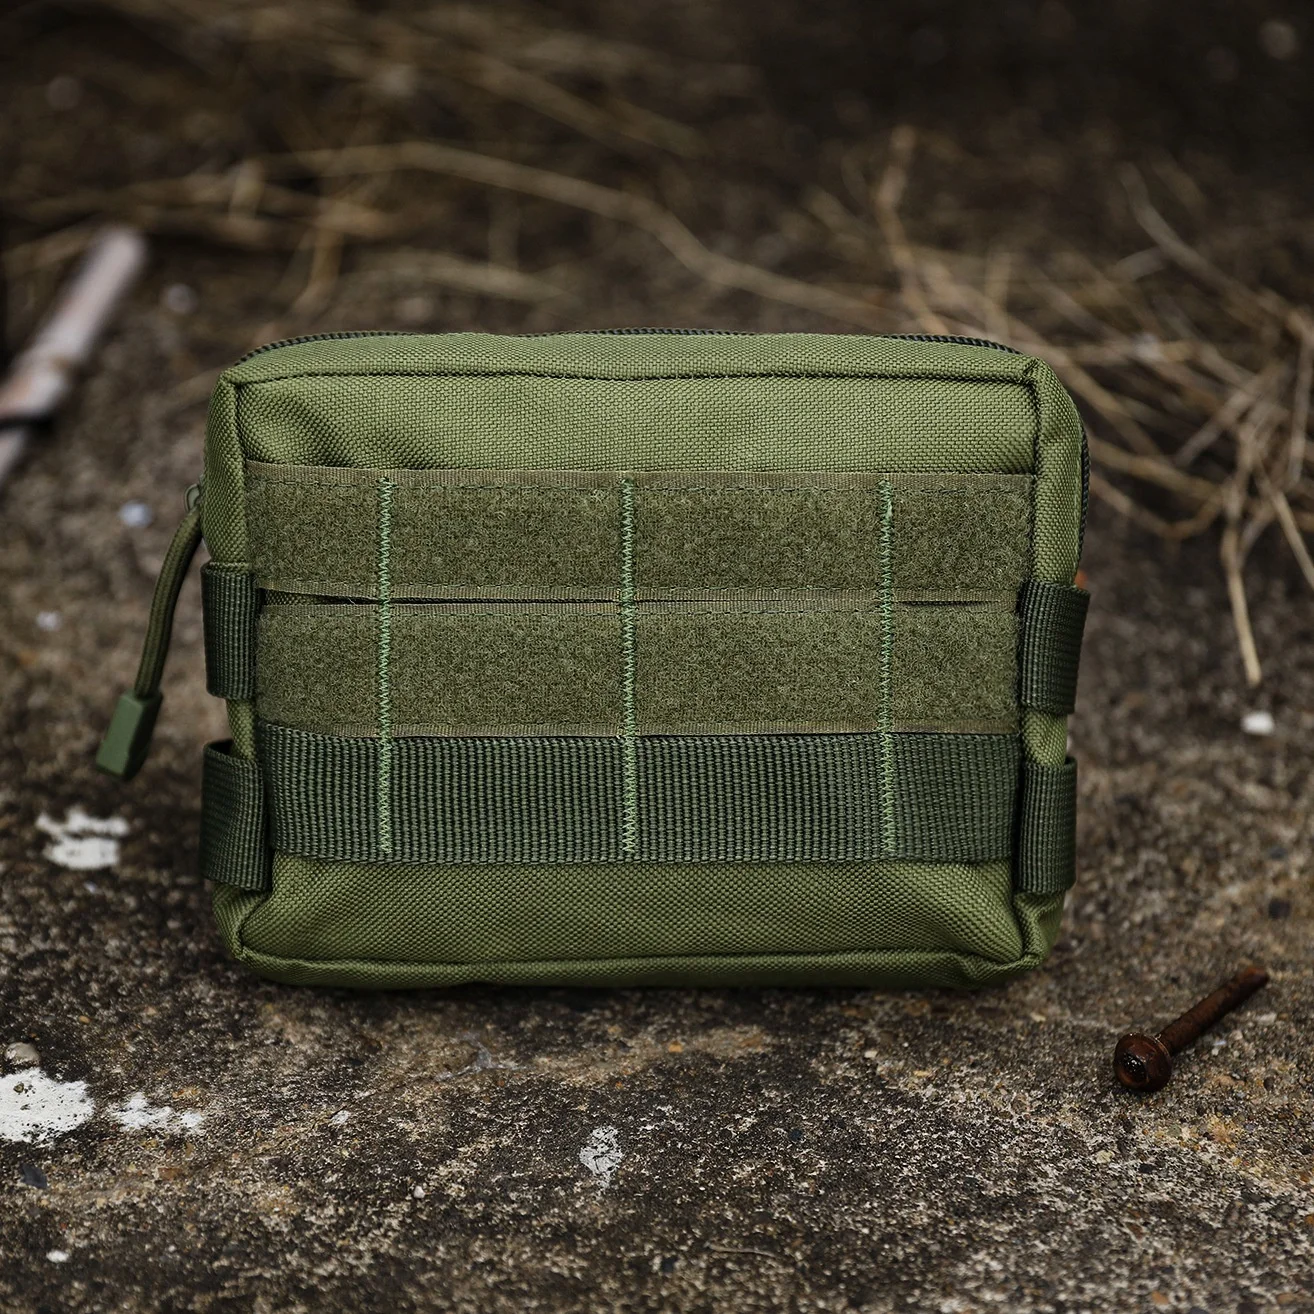 

Tactical Medical First Aid Pouch Phone Holder Case Hunting Bag Outdoor Military Molle Utility EDC Tool Waist Pack